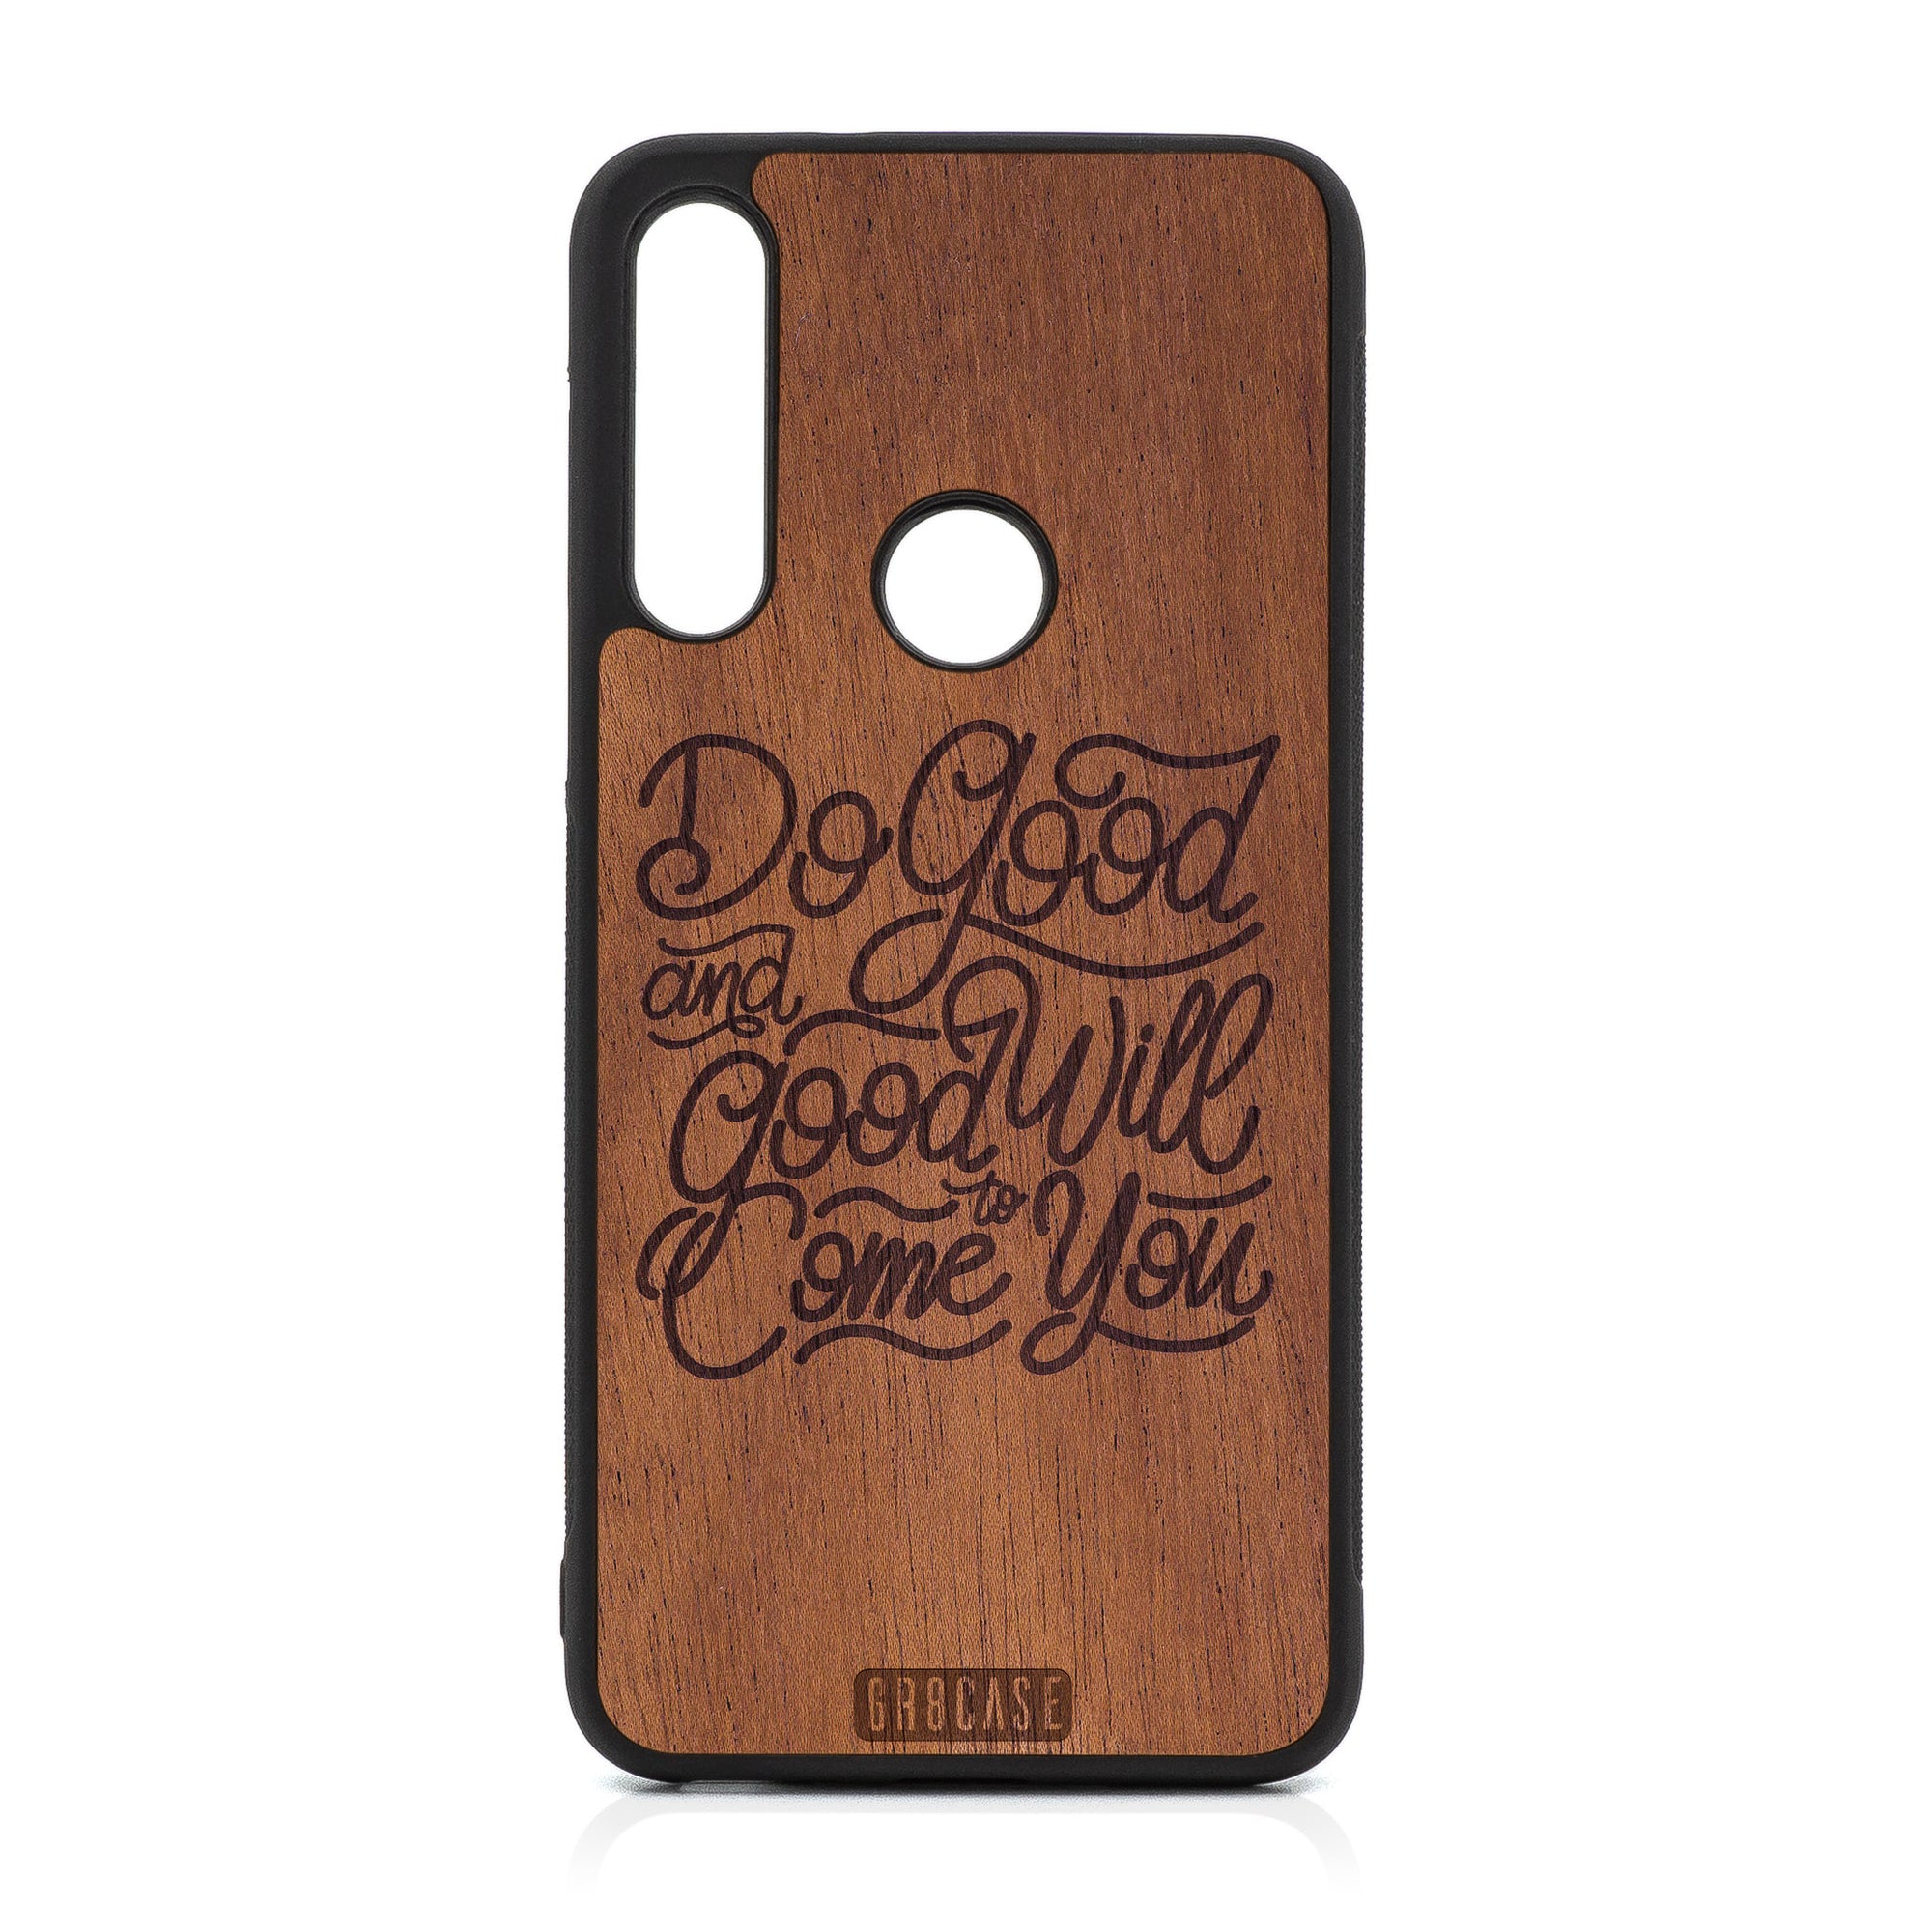 Do Good And Good Will Come To You Design Wood Case For Moto G Fast